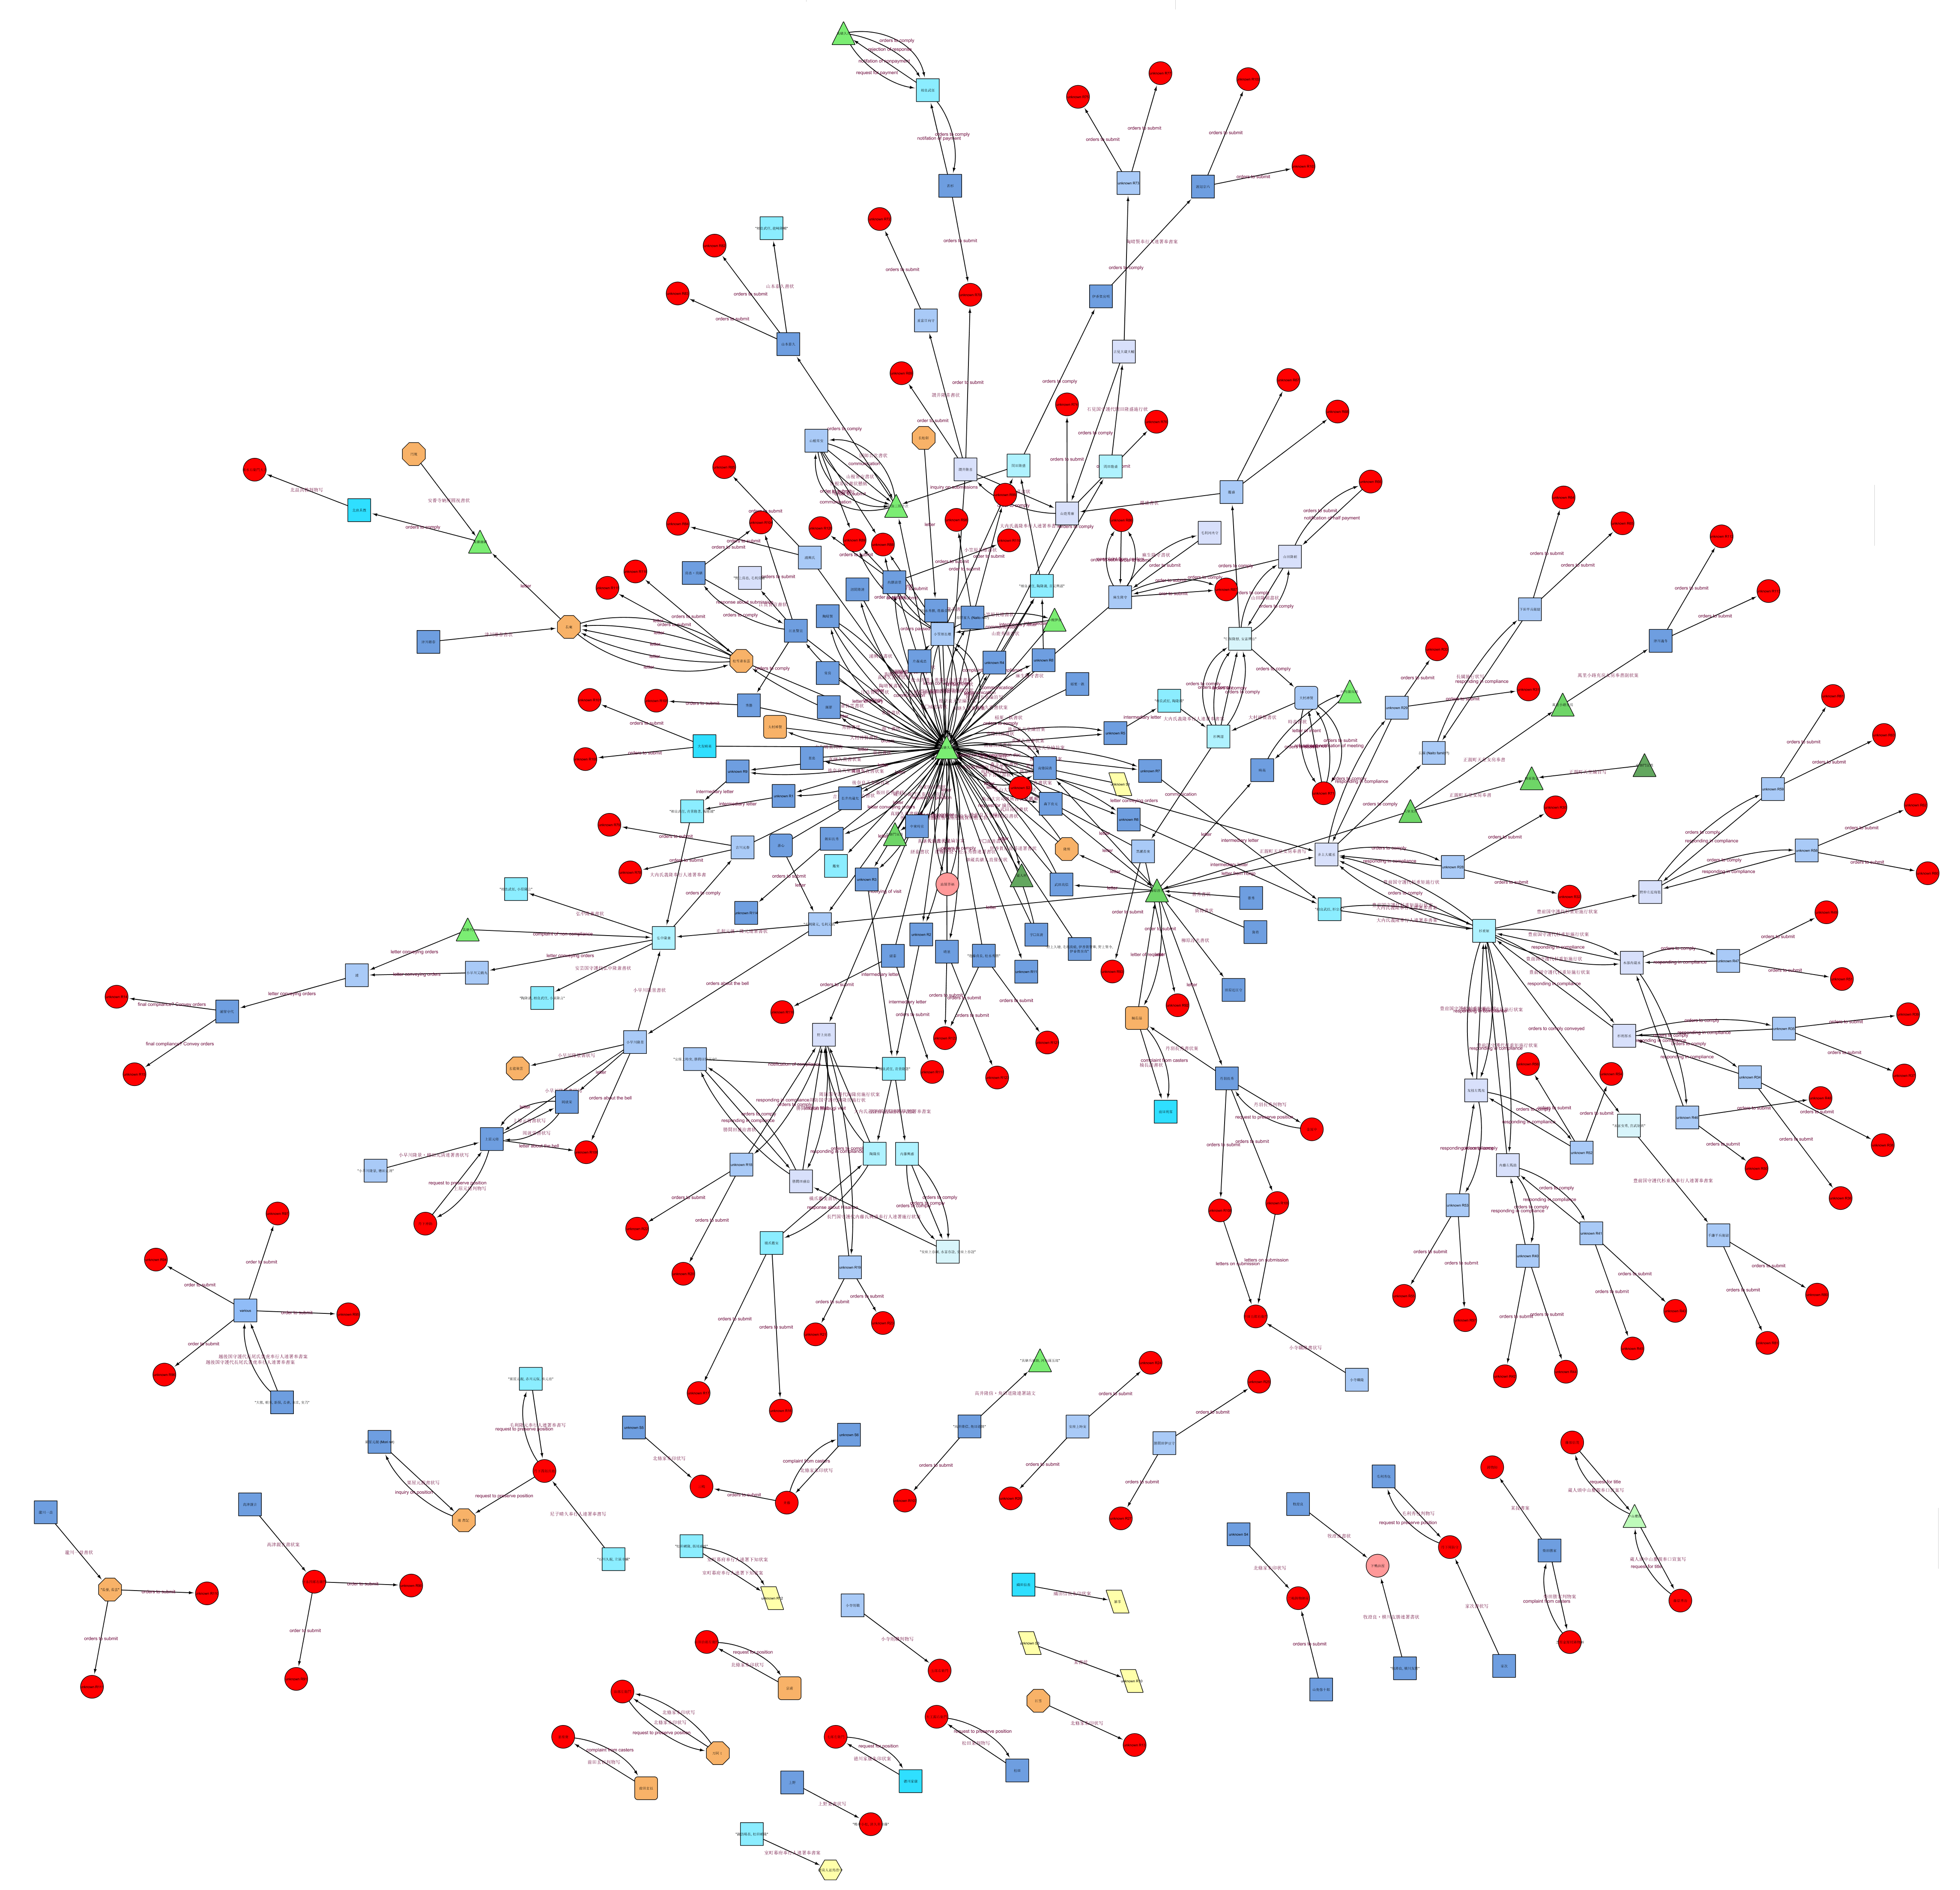 extant and presumed document network visualization